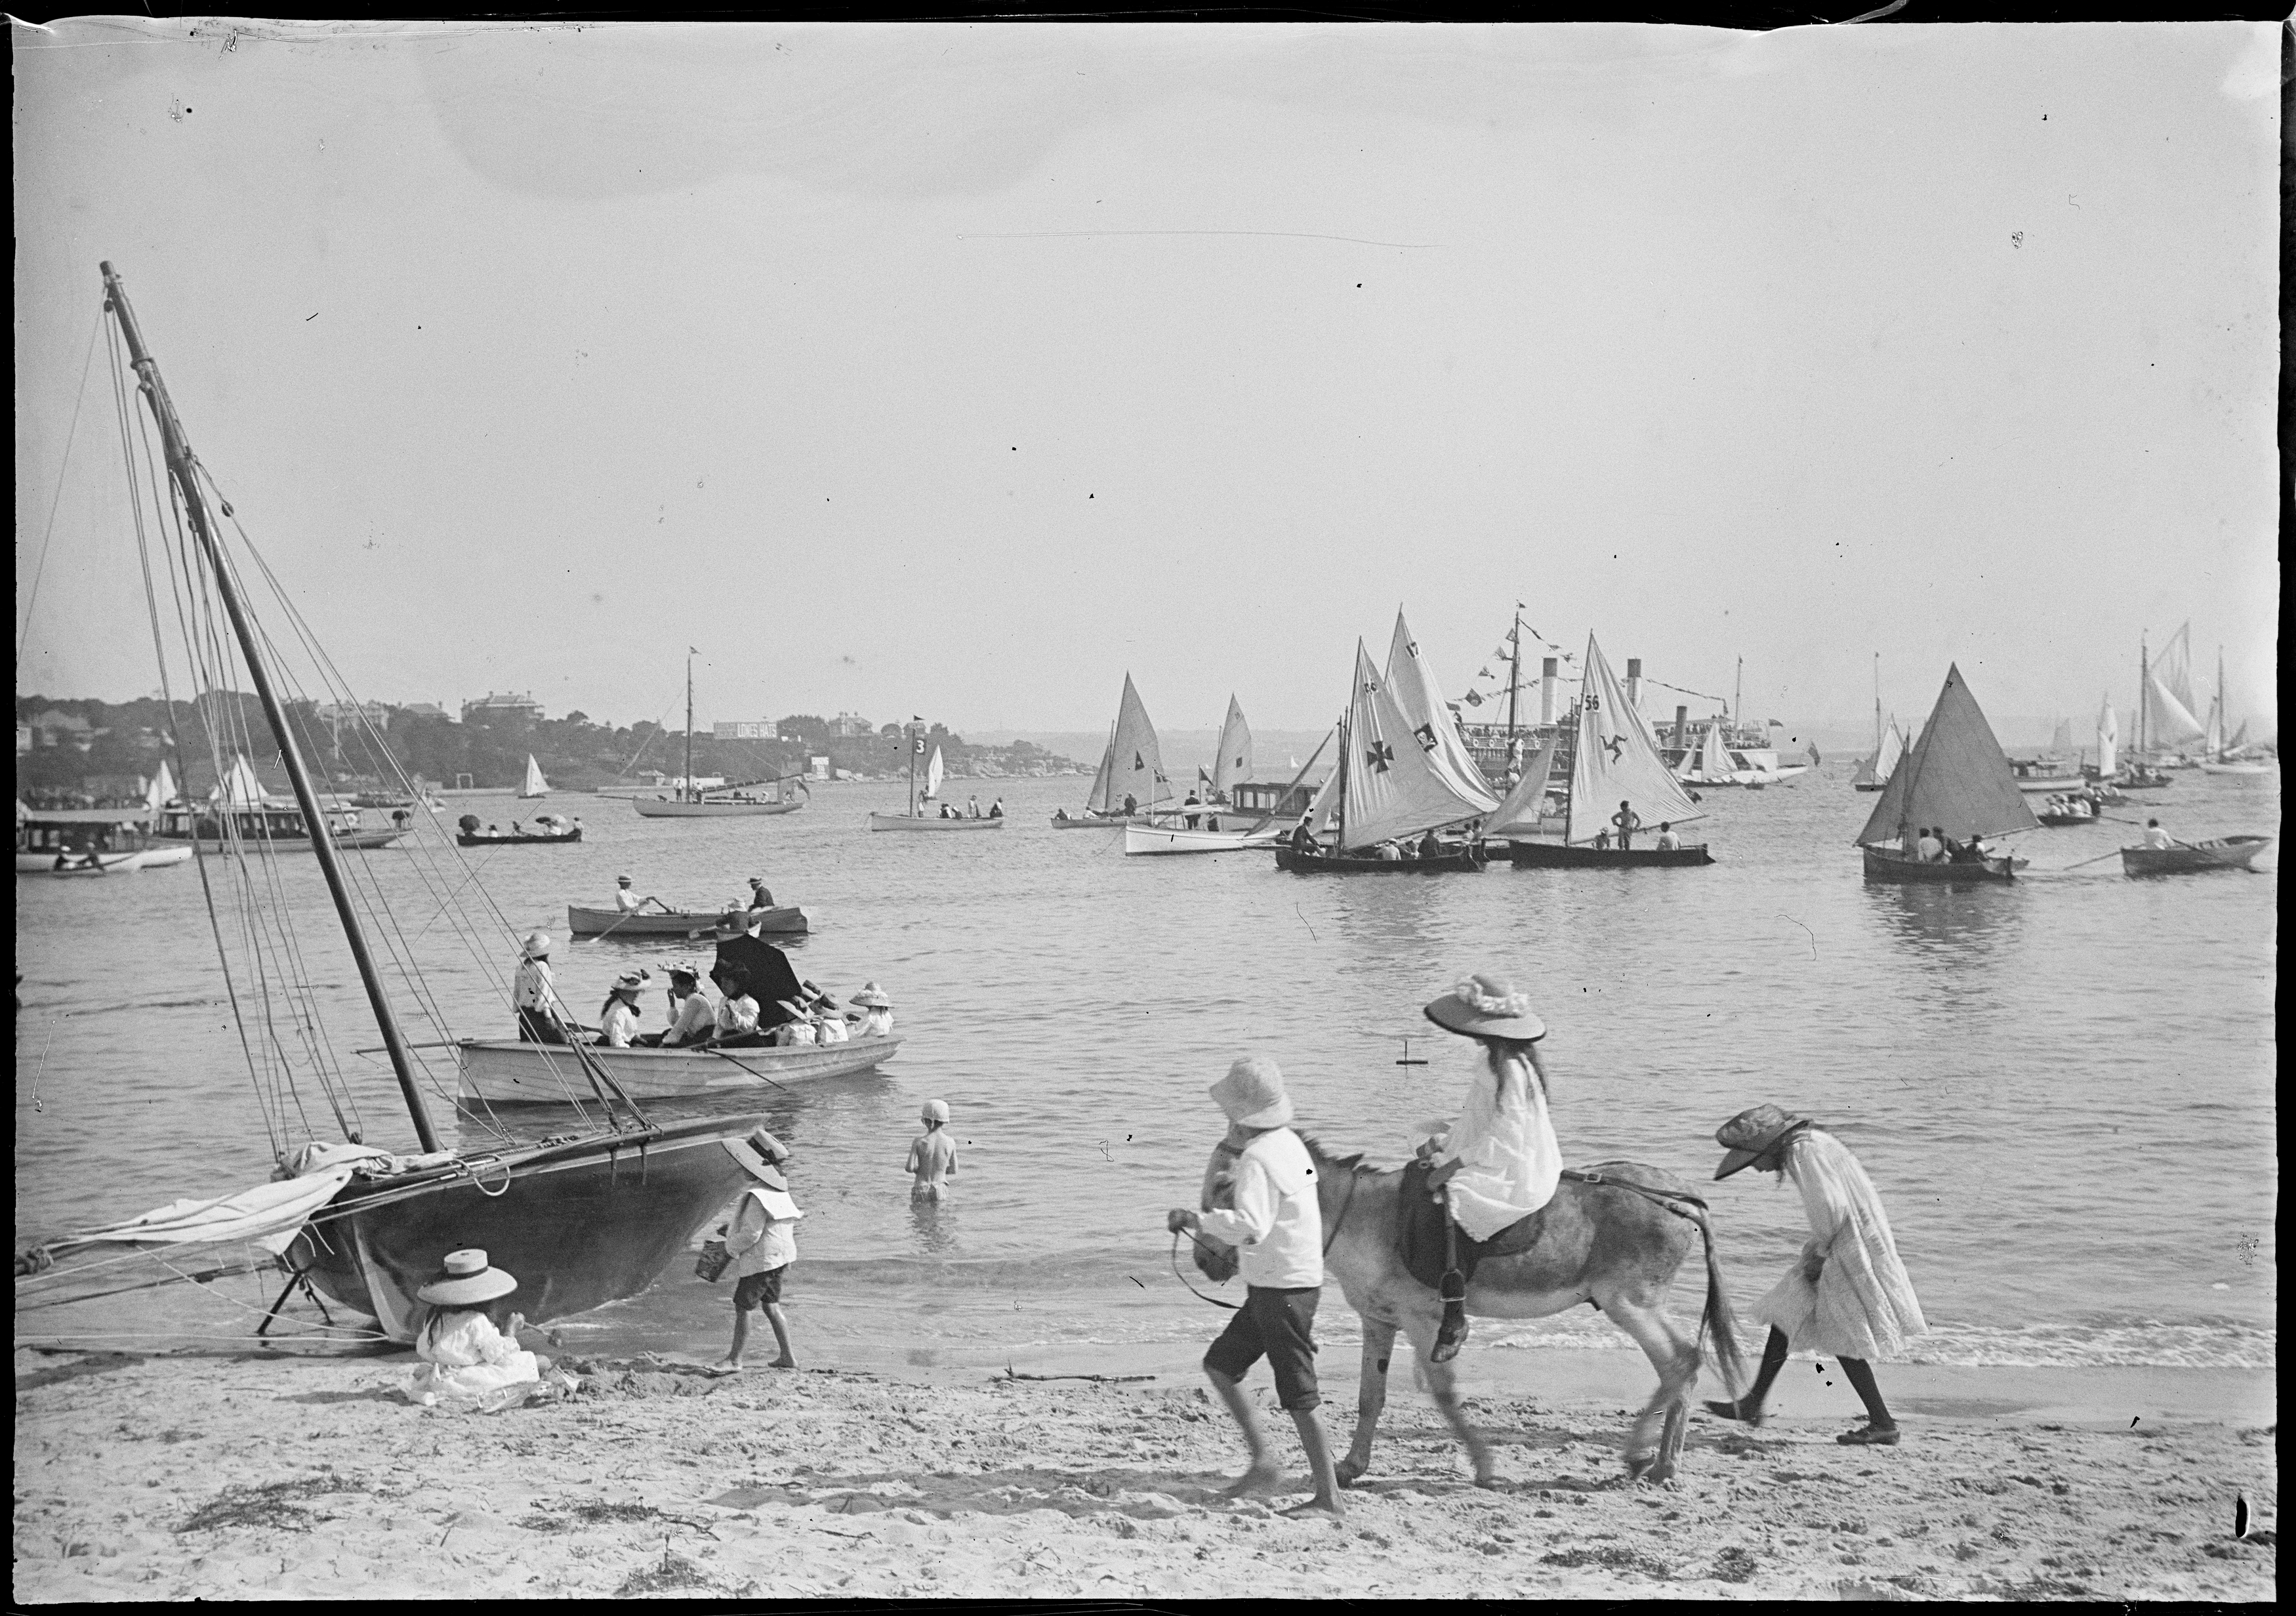 Donkey rides at Manly Cove, with children on sand and sail boats 